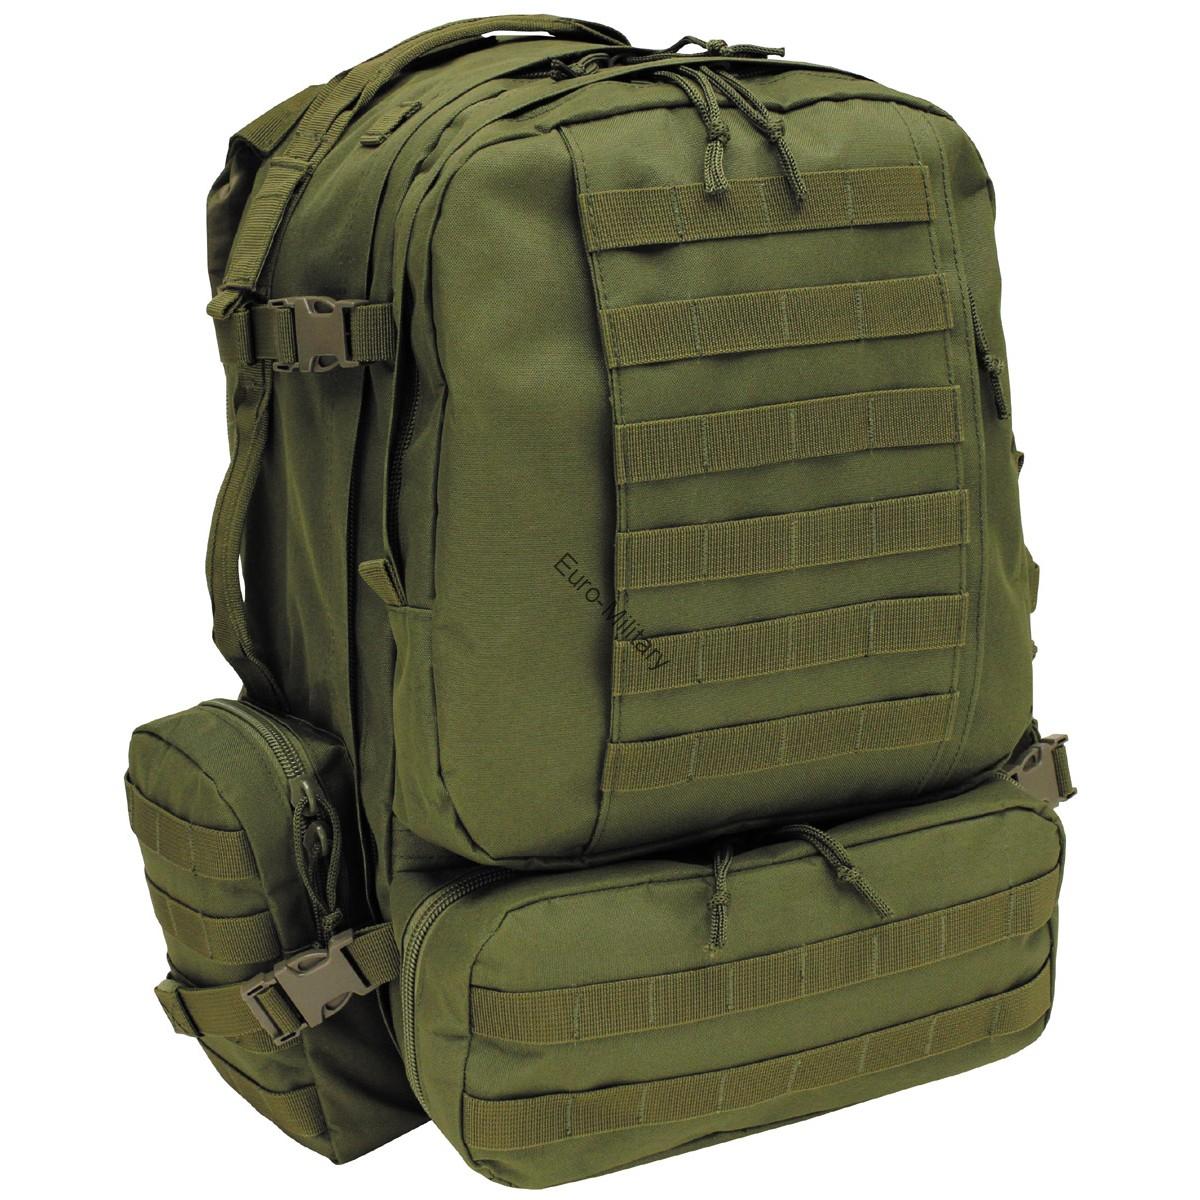 MFH Defense® Military Outdoor Backpack Bag Tactical Modular 46L - OD Green